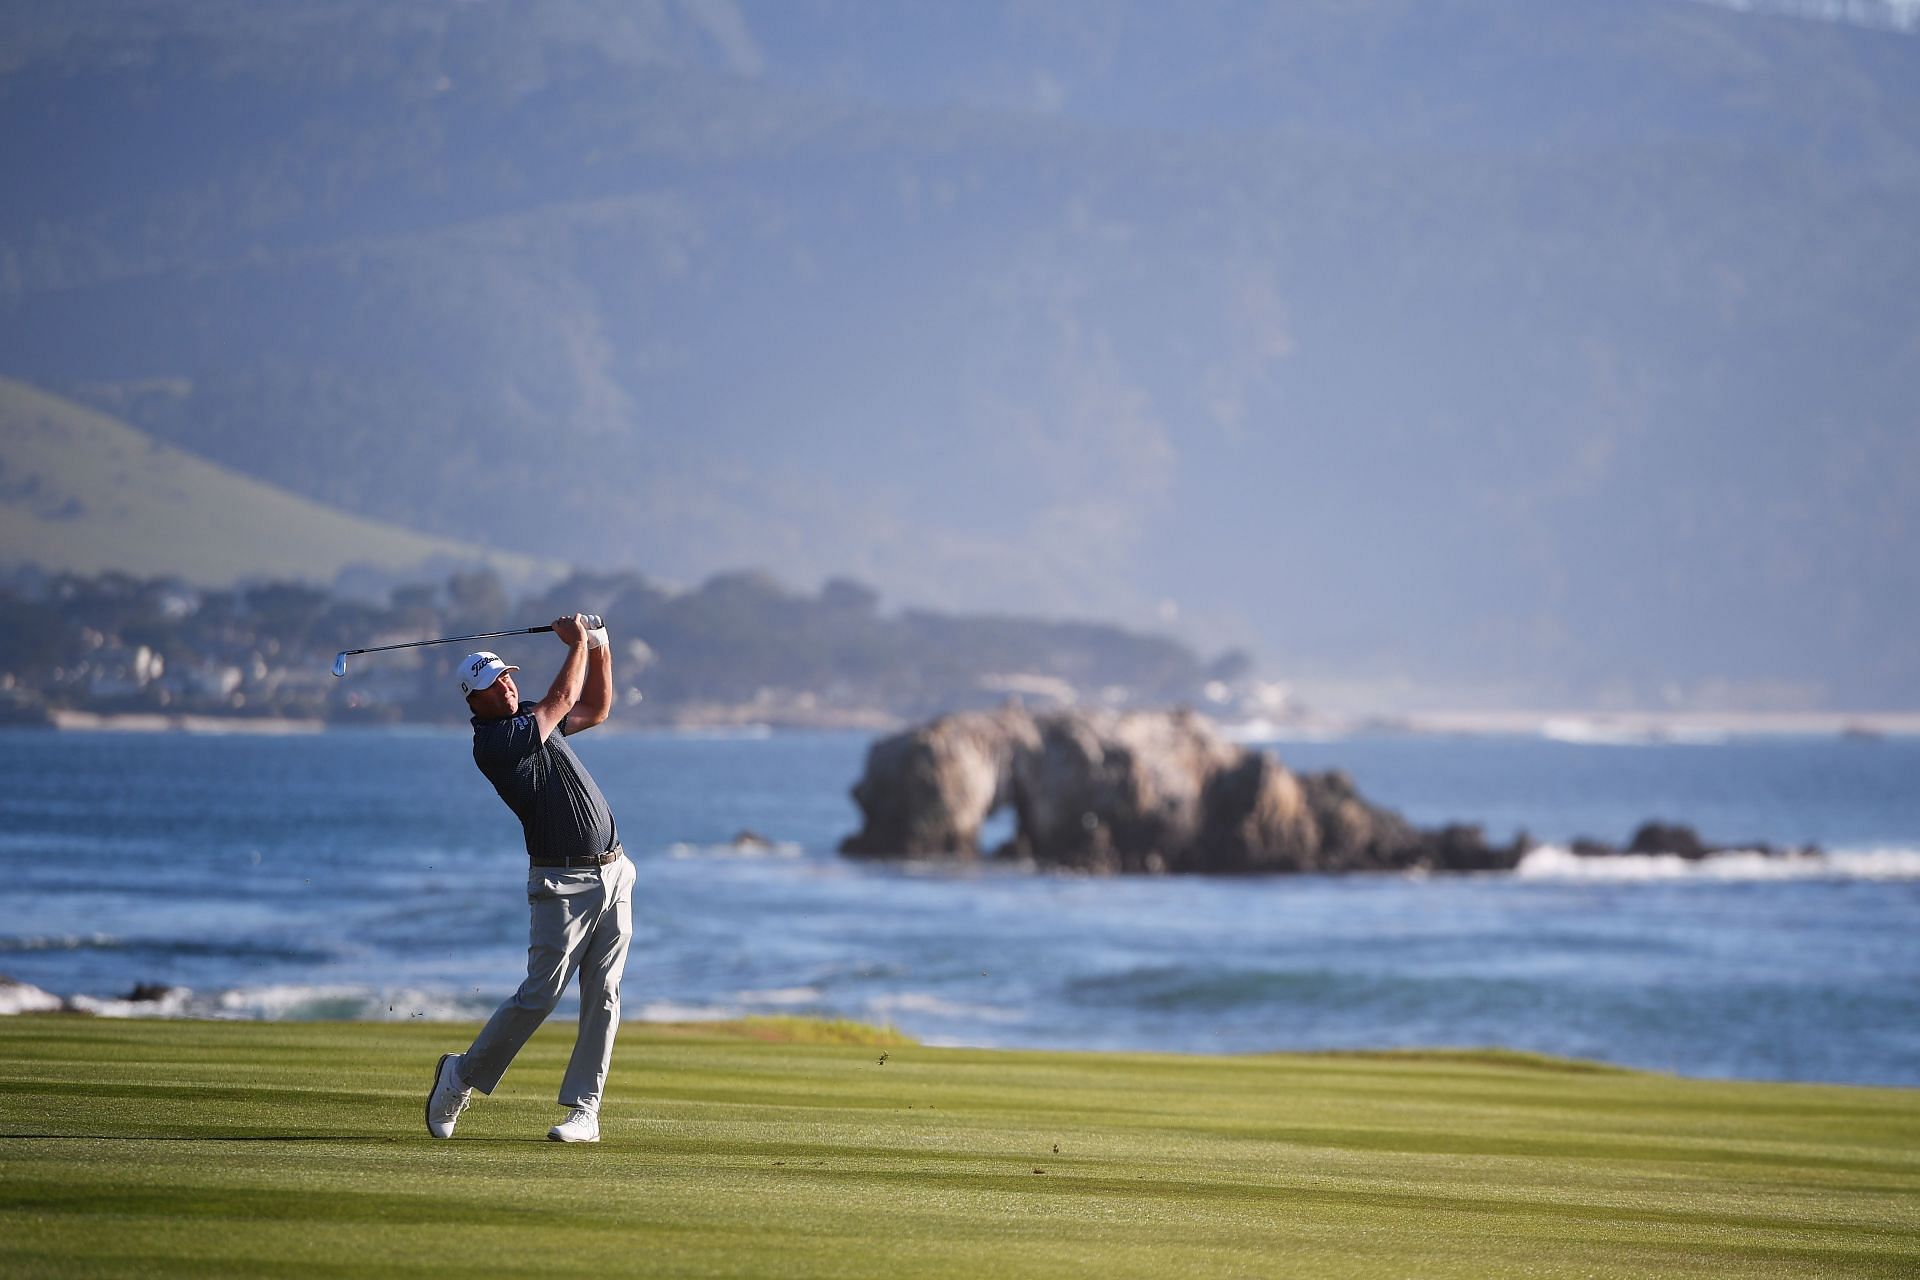 Jersey Jerry virtually went to Pebble Beach to try a hole in one